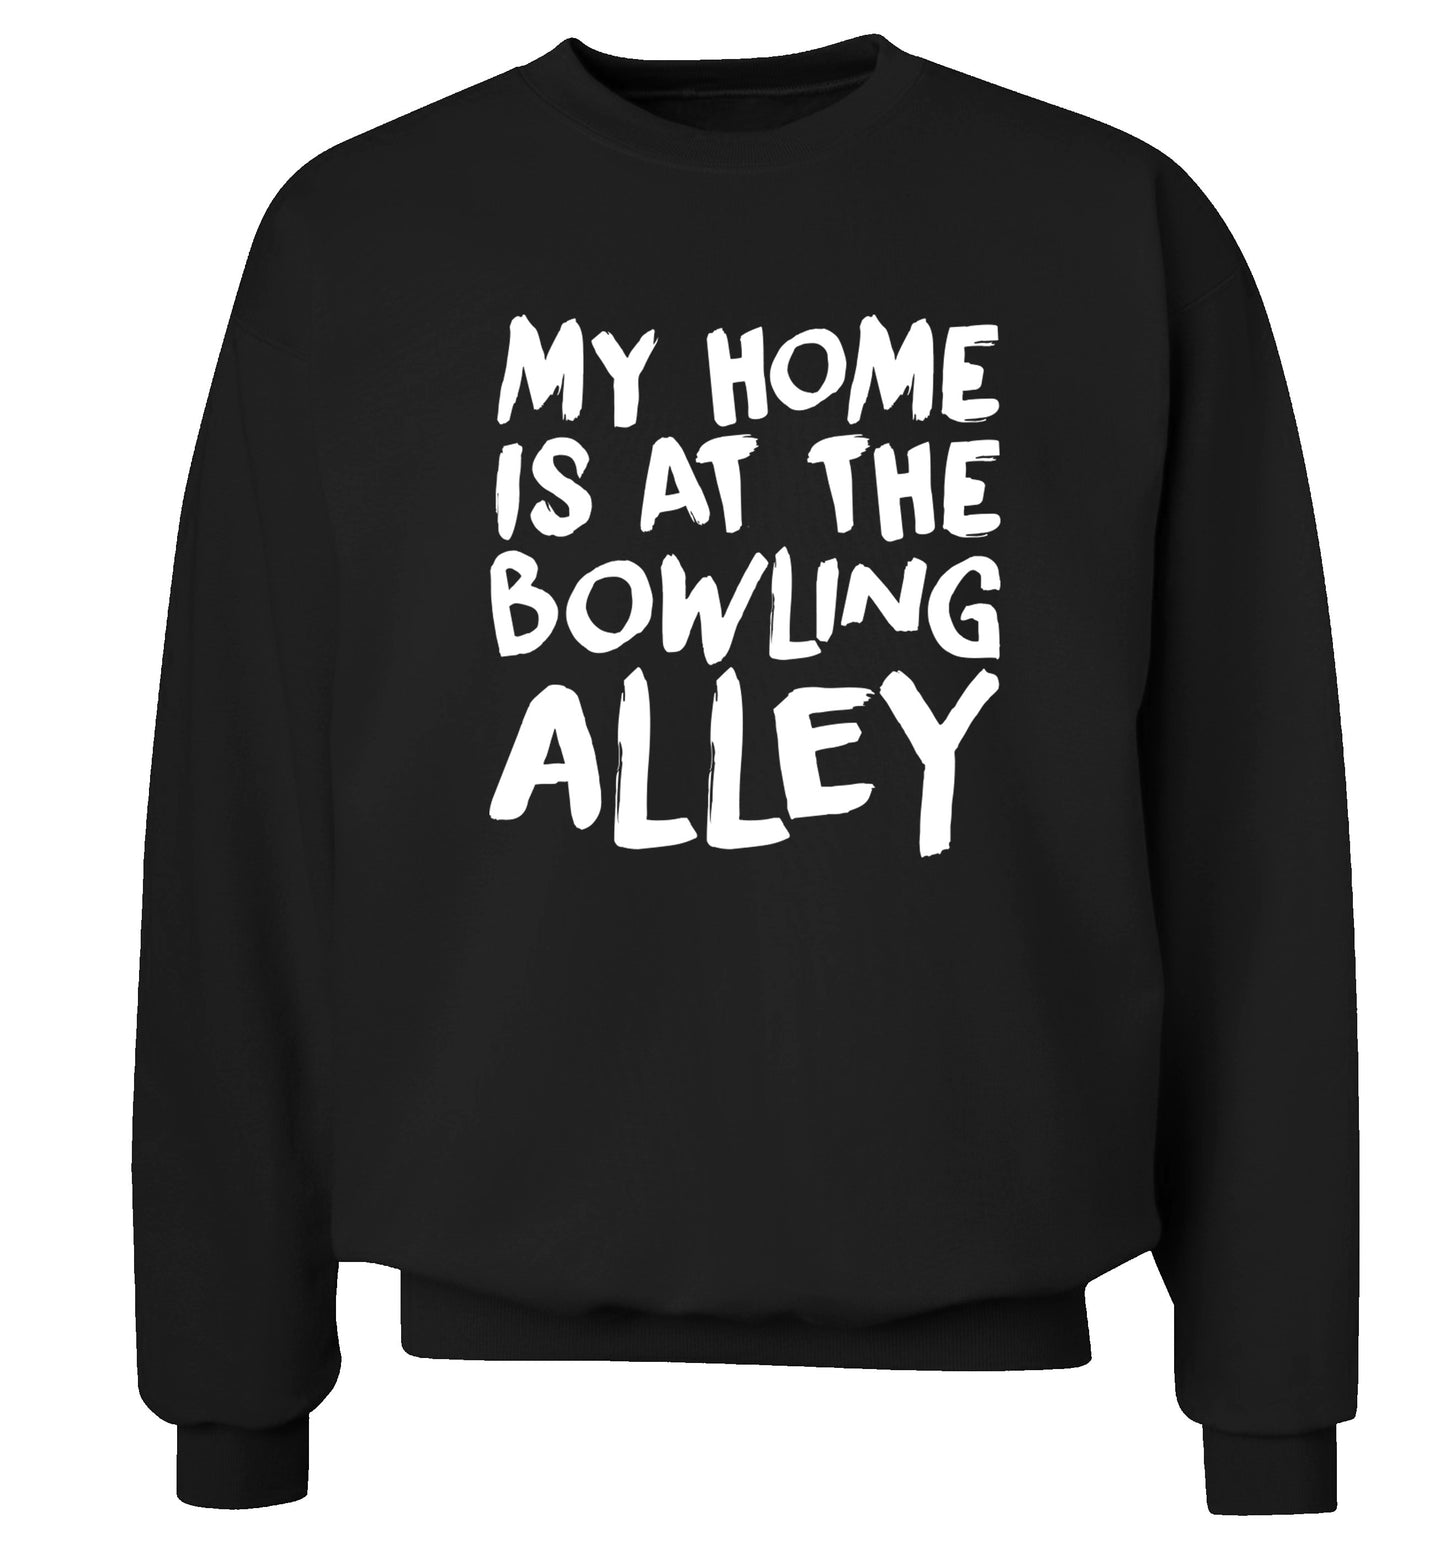 My home is at the bowling alley Adult's unisex black Sweater 2XL